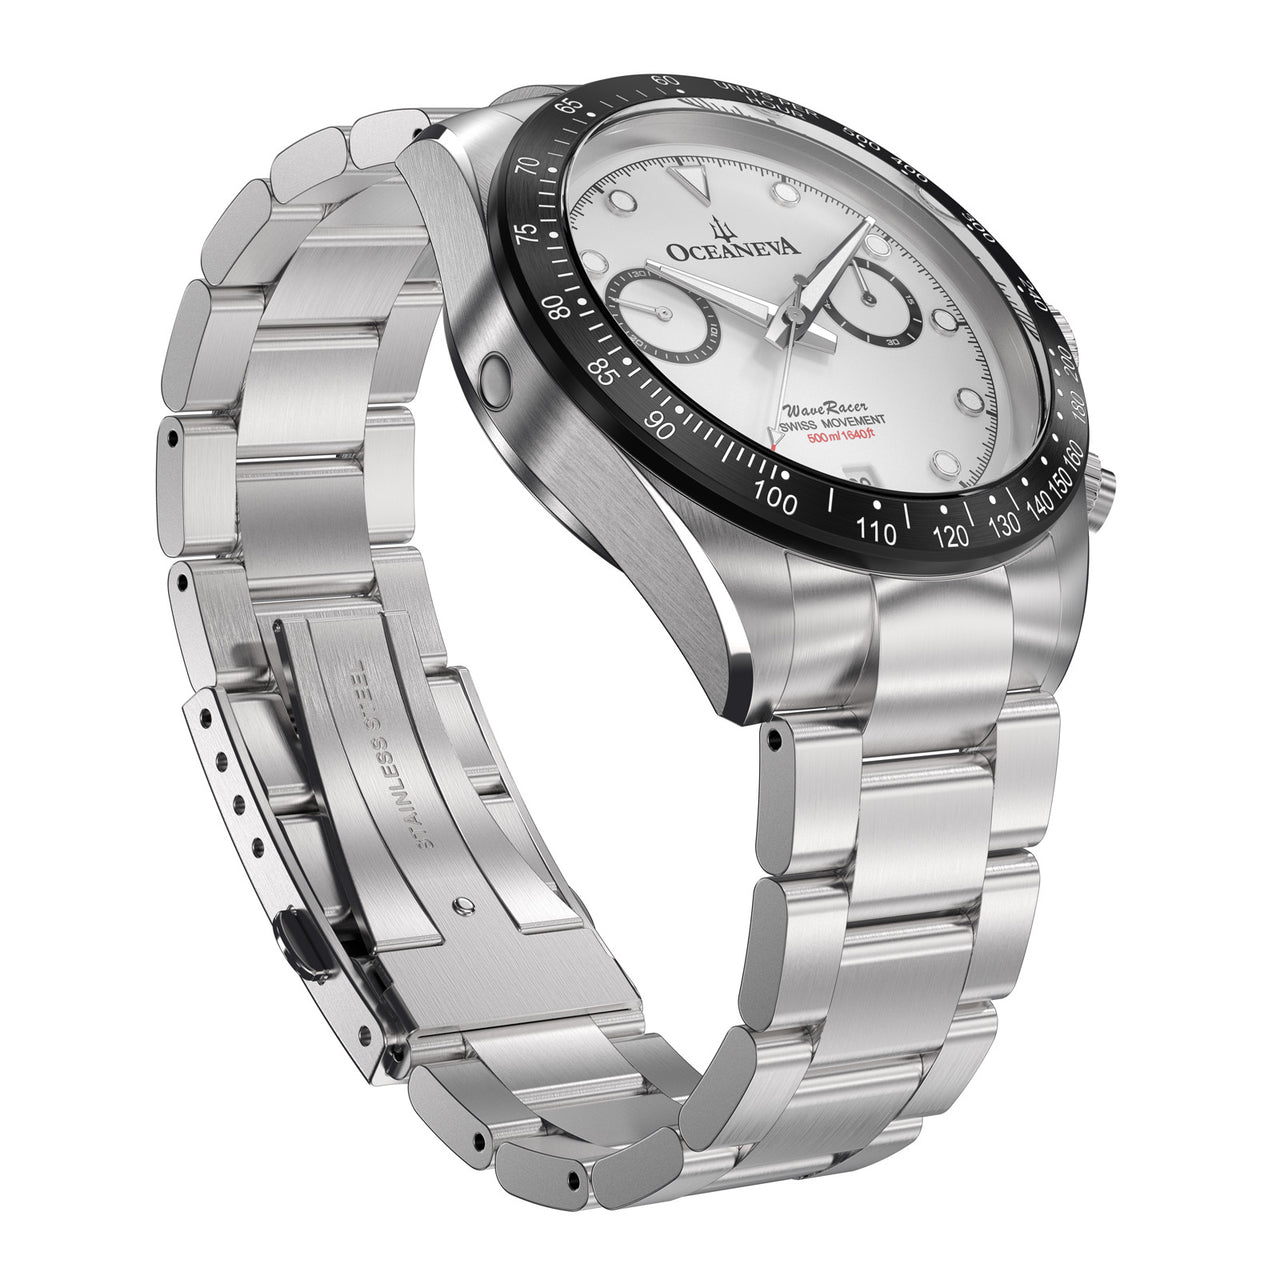 Oceaneva™ Men's WaveRacer™ 500M Pro Diver White Dial Panda Chronograph Watch At Angle Show Inner Clasp